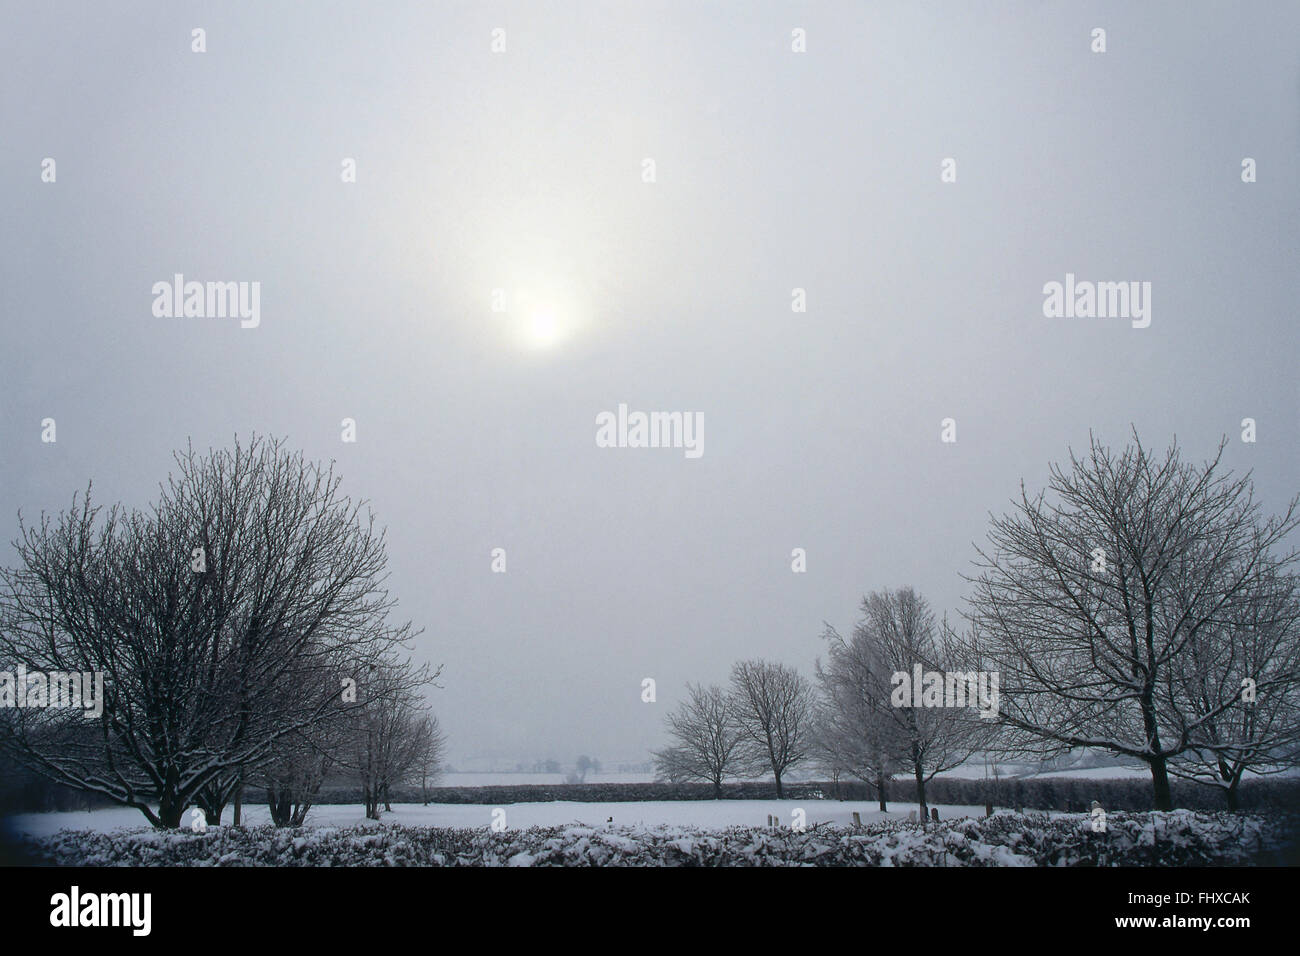 Altostratus translucidus, extensive cloud extensive sheet, translucent cloud layer, revealing the position of the sun, snow-covered countryside and trees below in foreground. Stock Photo